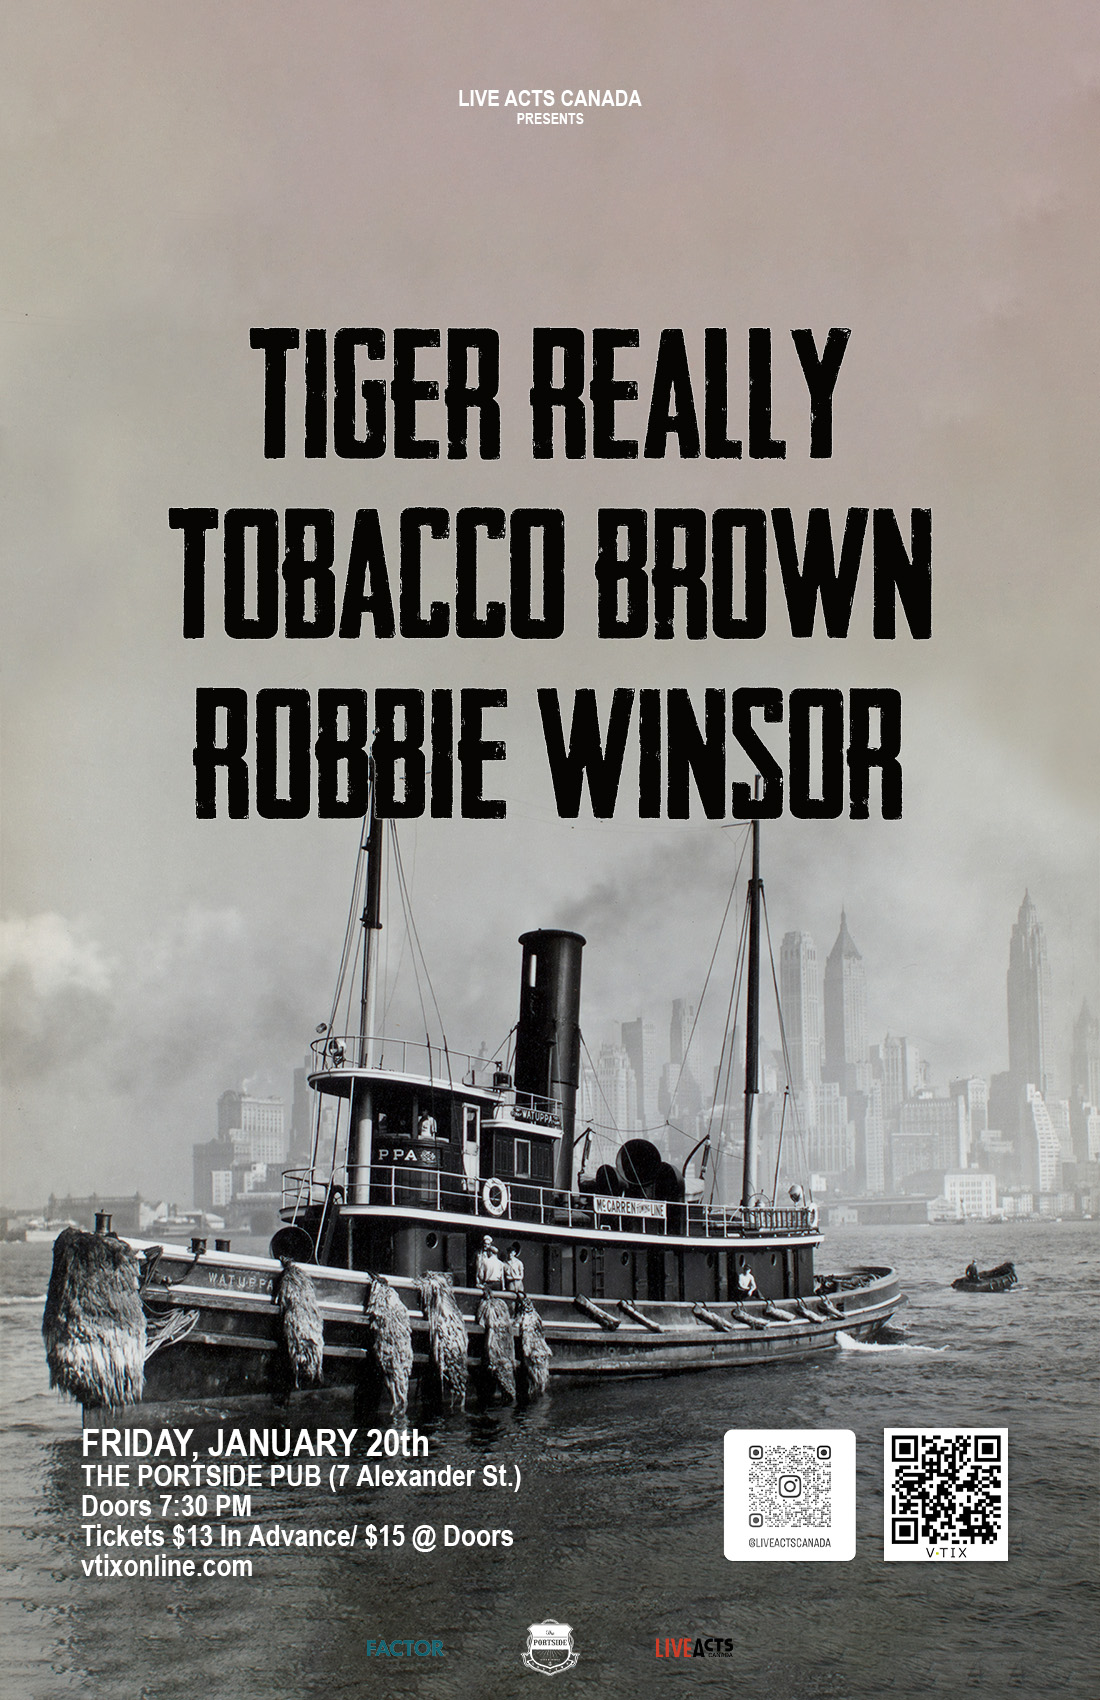 Tiger Really With Special Guests, Tobacco Brown and Robbie Winsor